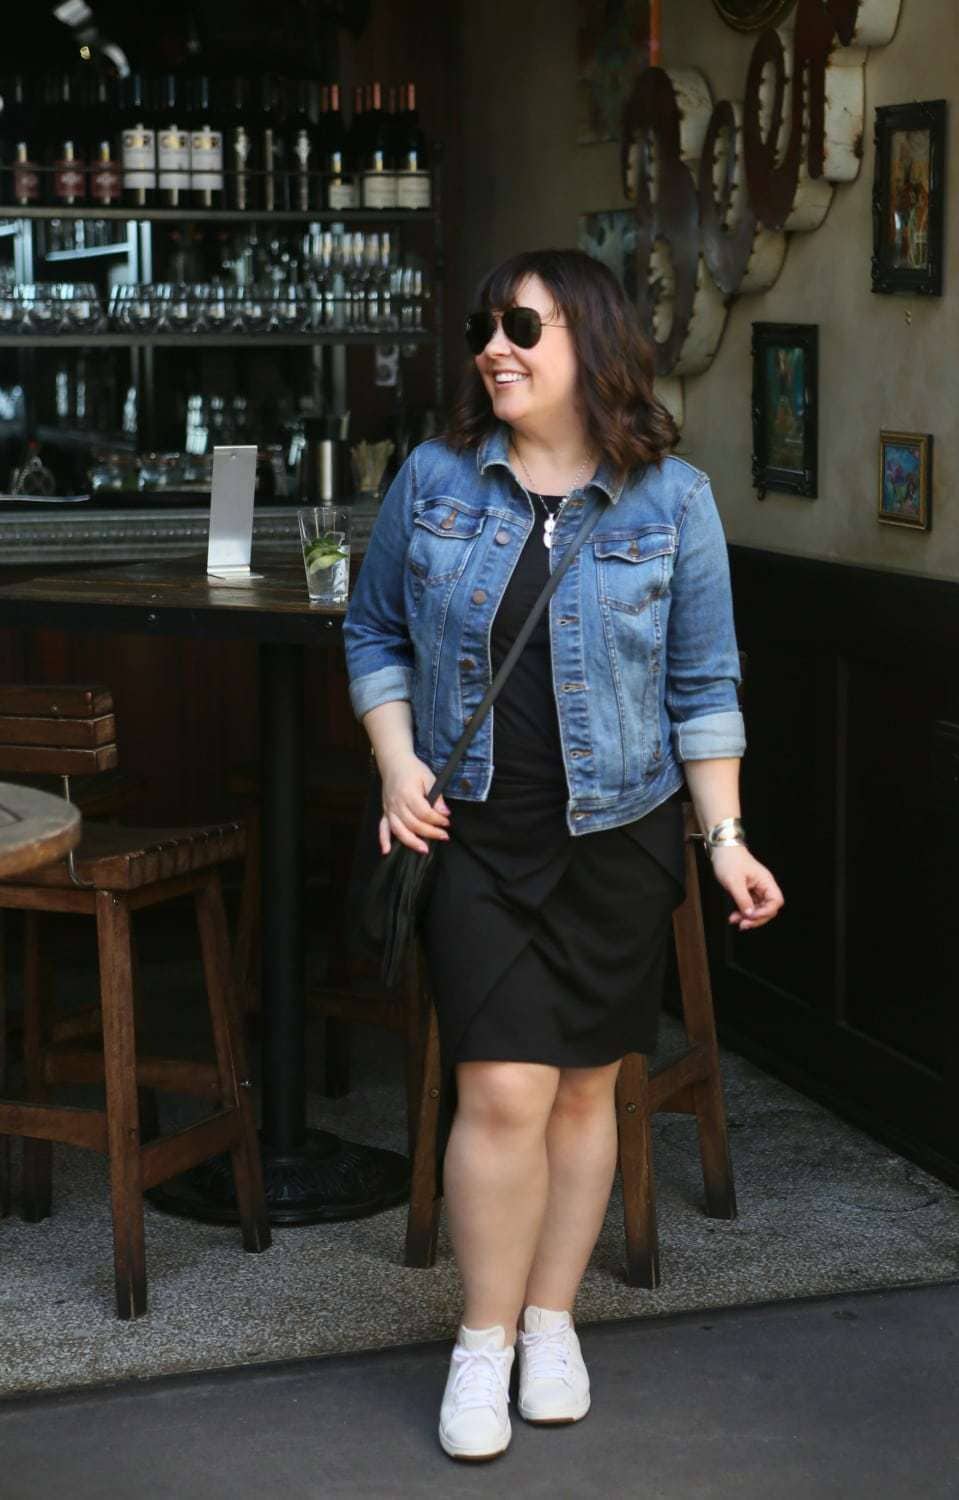 tips on how to wear black in the summer by wardrobe oxygen